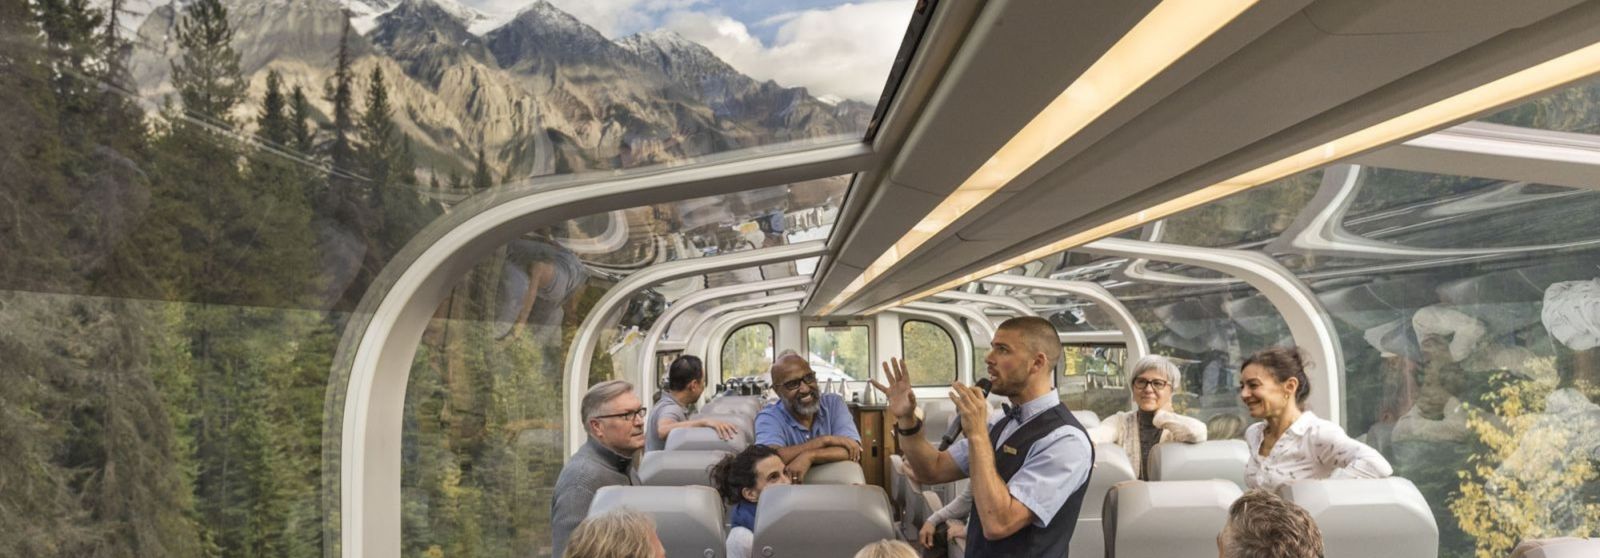 Rocky Mountain Train with panoramic windows with onboard guests listening to a tour guide